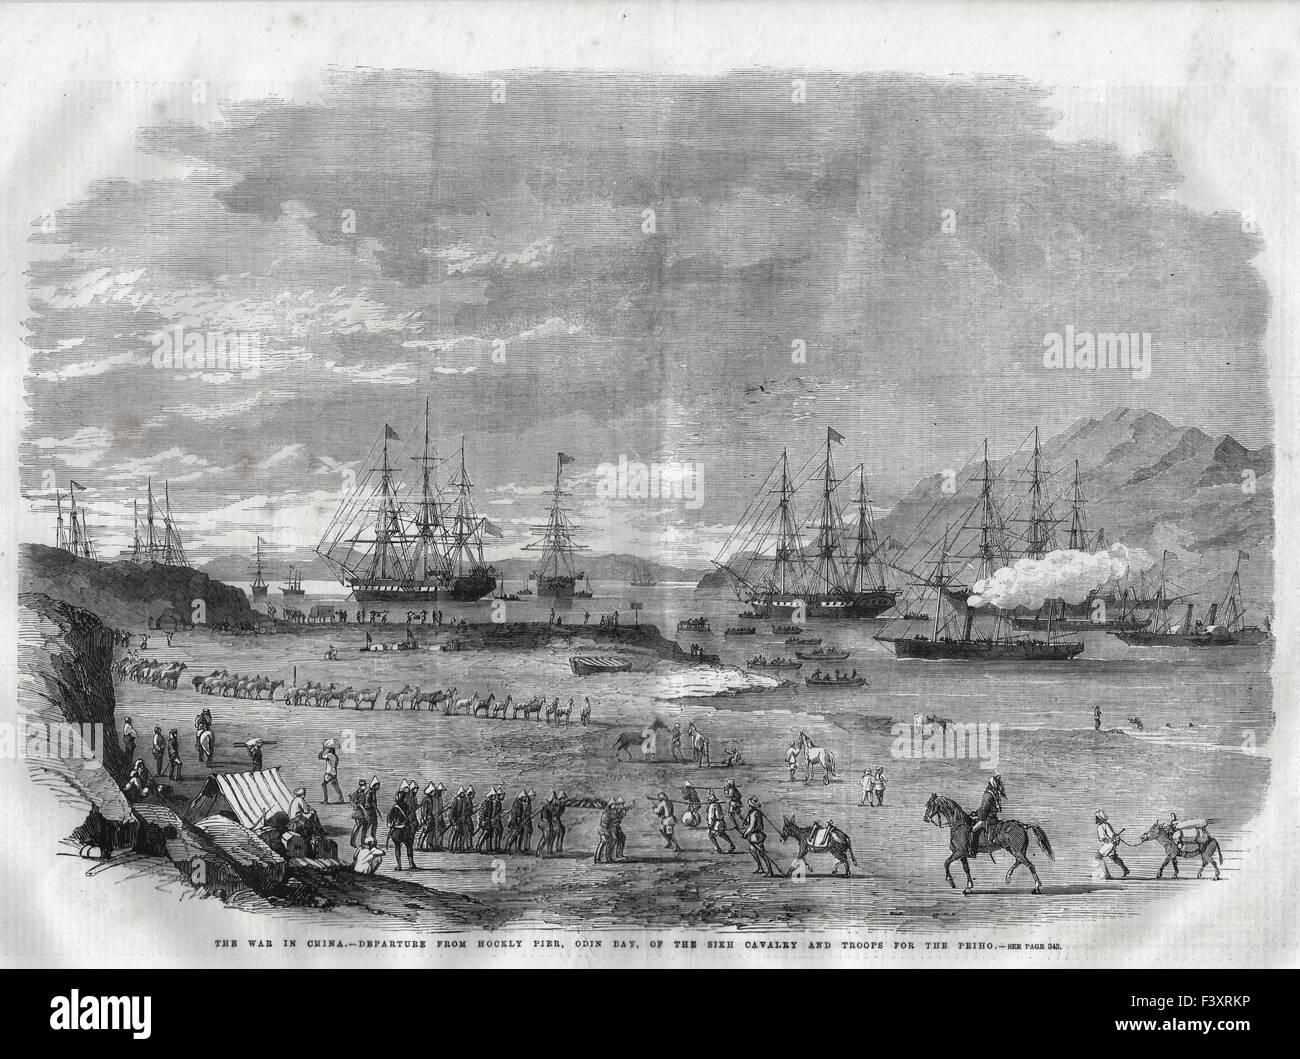 The War in China, Departure from Hockly Pier, Odin Bay, of the Sikh Cavalry and Troops for the Peiho Stock Photo